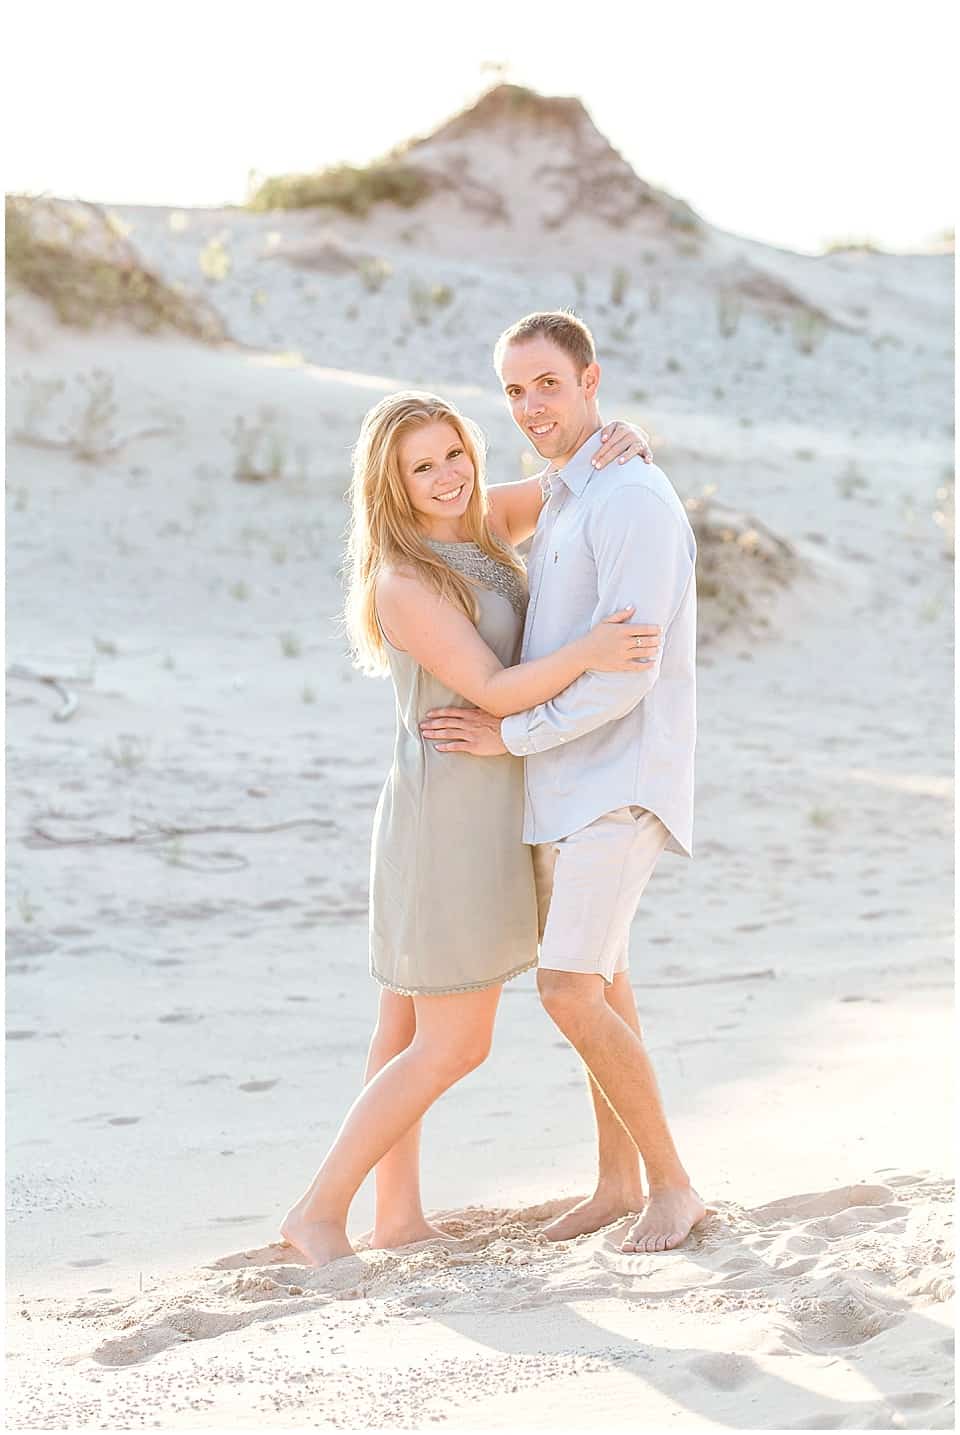 Engagement photos in sand dunes